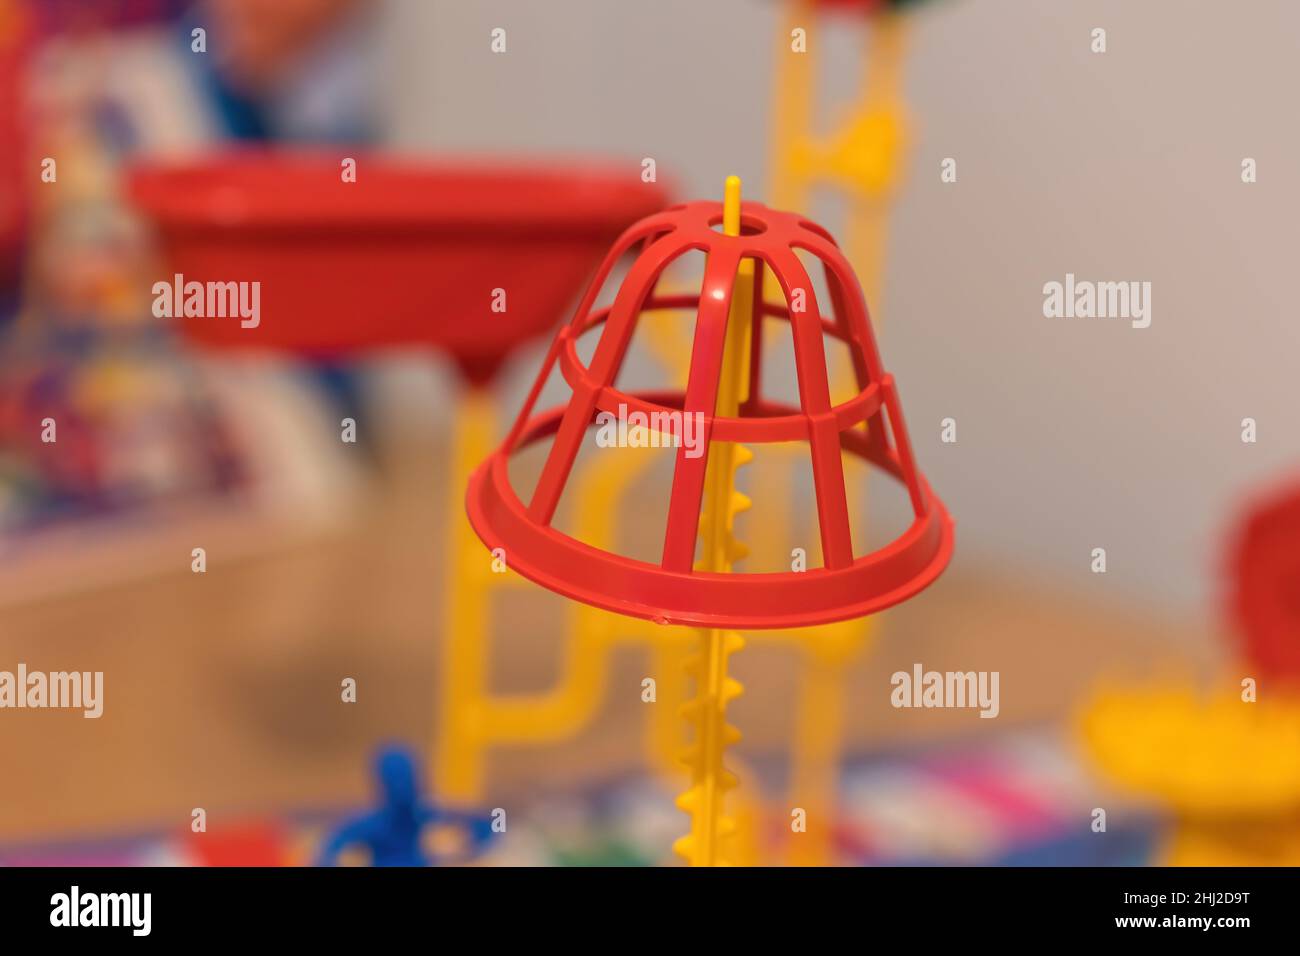 A close up view of the Red basket balanced on the yellow pole of the Mouse Trap. Stock Photo